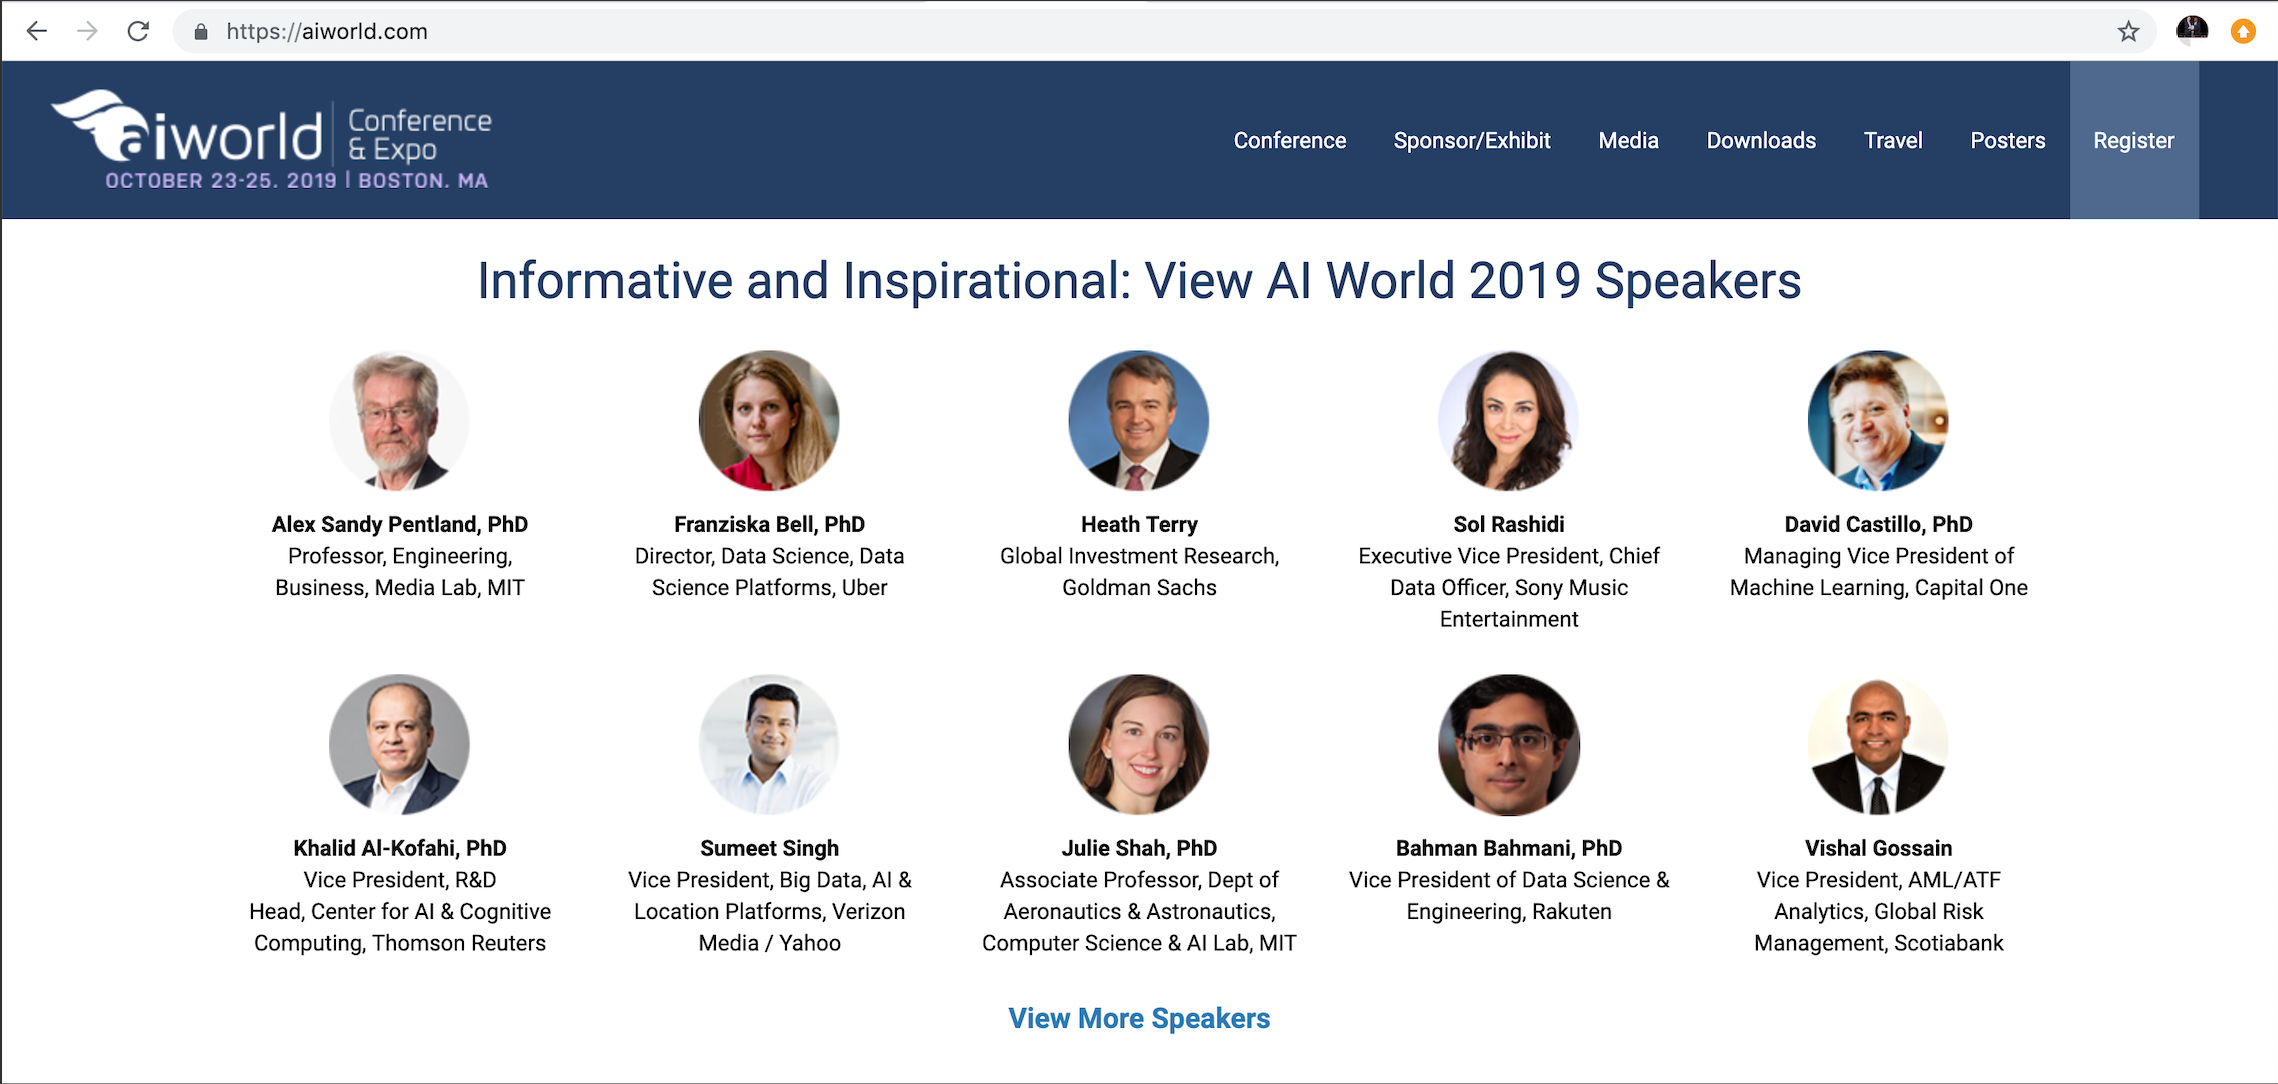 Professor Alex Sandy Pentland, Co-Founder of the Social Contract 2020, Will Speak at the AI World Conference and Expo 2019